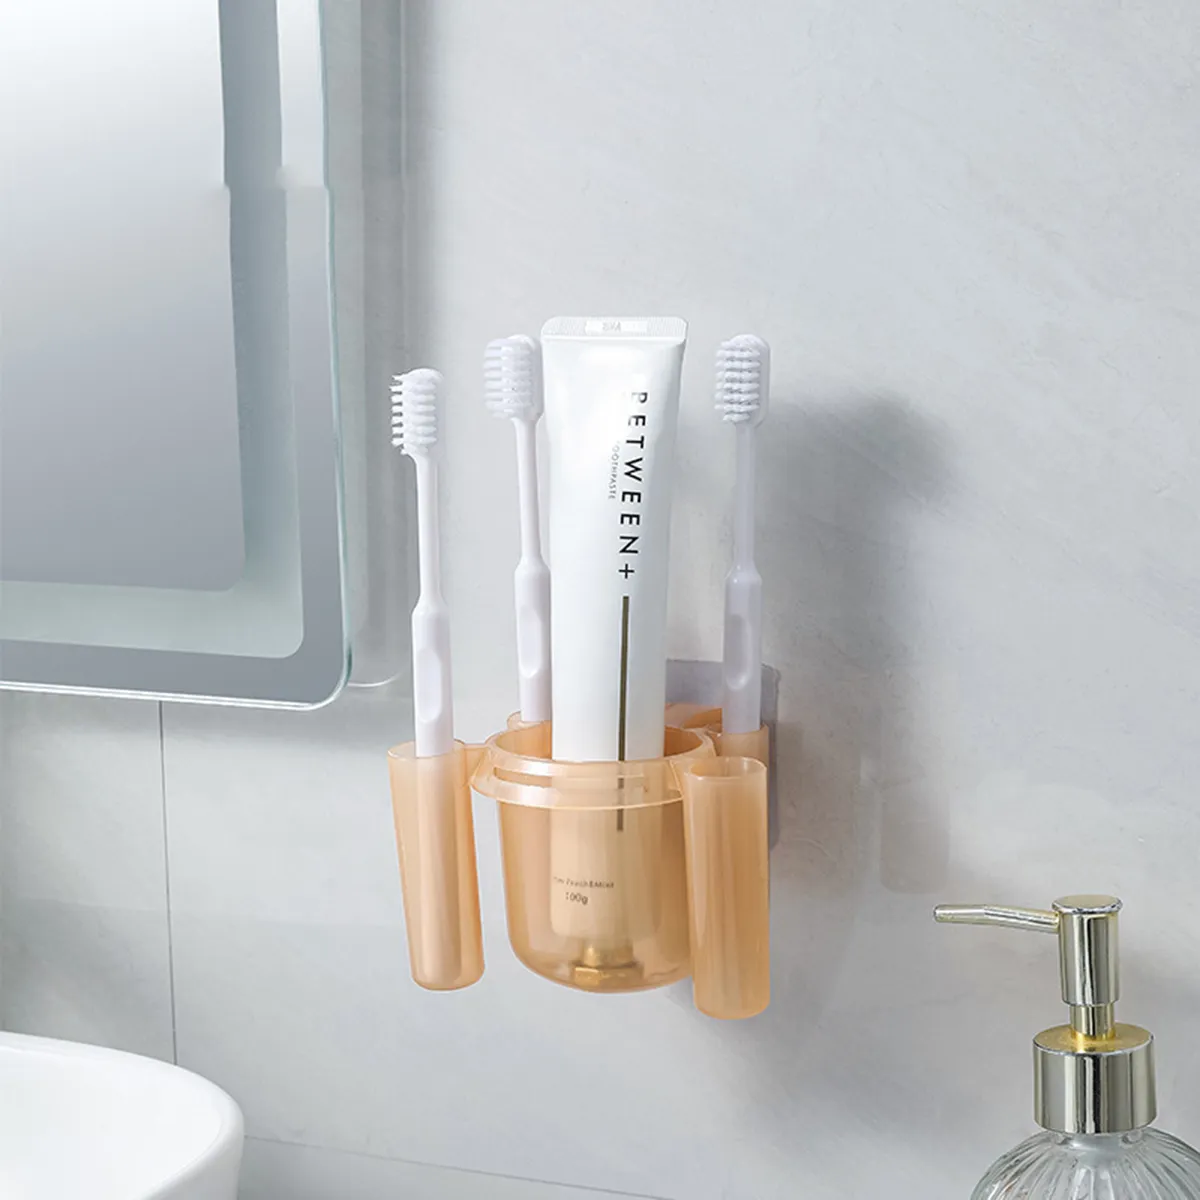 

No Drill Toothbrush and Toothpaste Holder Bathroom Organizer